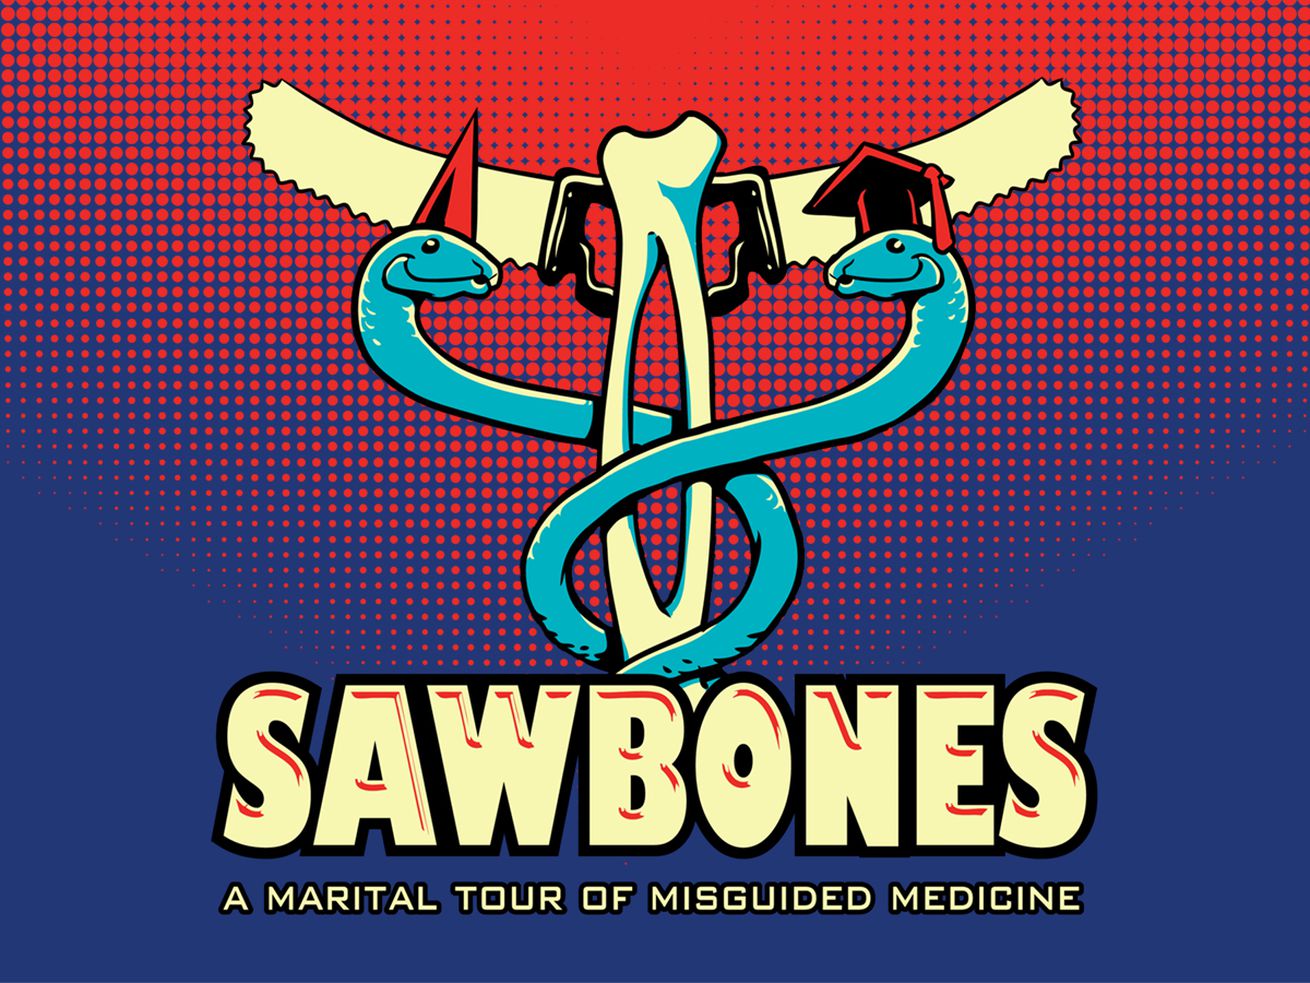 An illustration of two blue snakes twisting around a radius and ulna bone topped with a handsaw coming off either side to form a caduceus staff. The snake on the left is wearing a red dunce cap and the snake on the right is wearing a red graduation cap. The background is a pop art style red to blue fade. At the bottom of the image it says “Sawbones” with “A marital tour of misguided medicine” written below that.